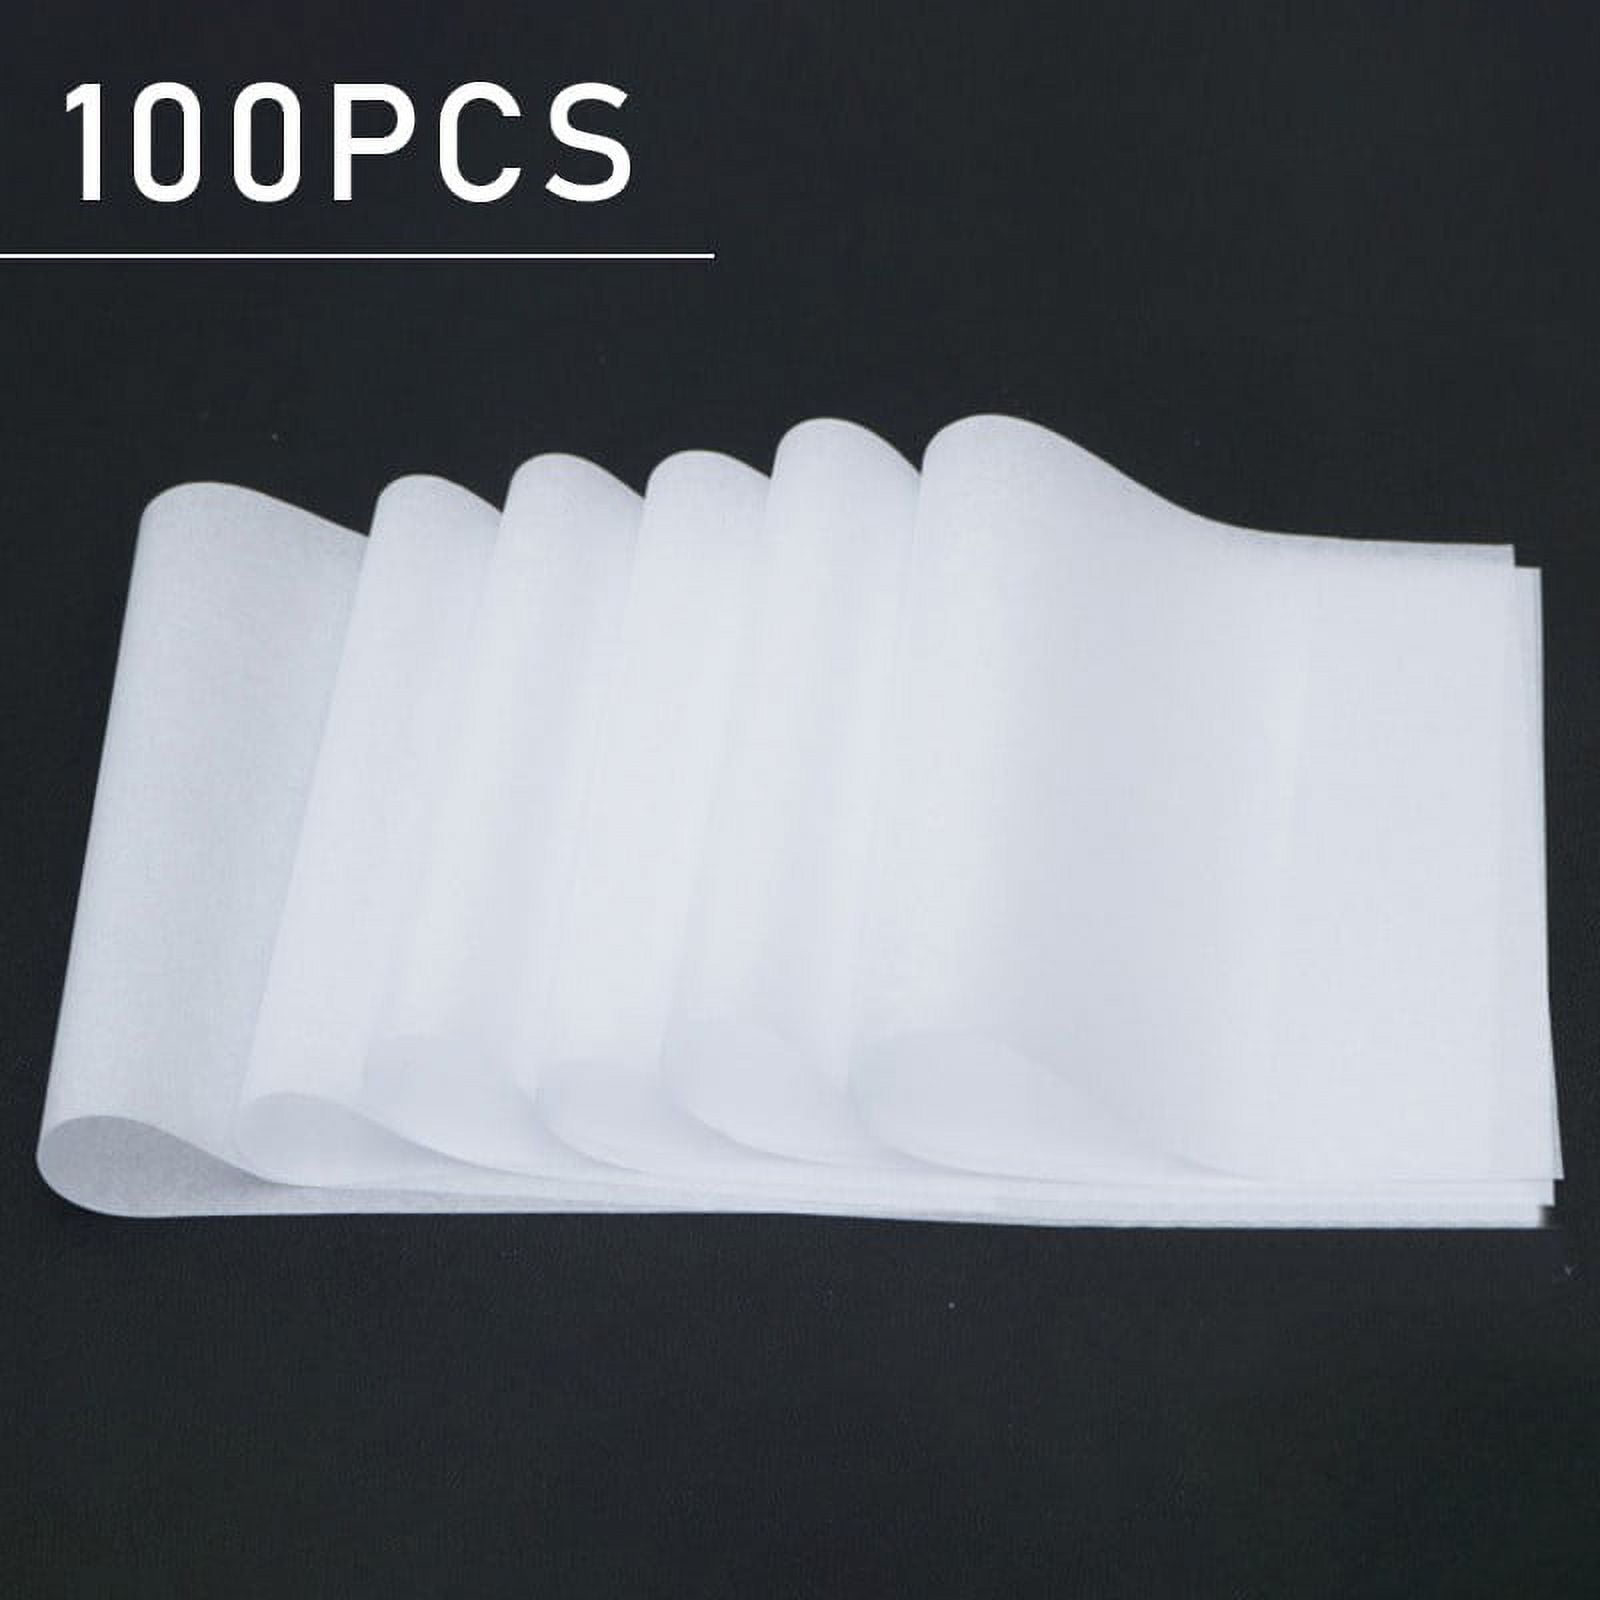 Lakeer A4 Tracing Paper Pack of 100 Sheets